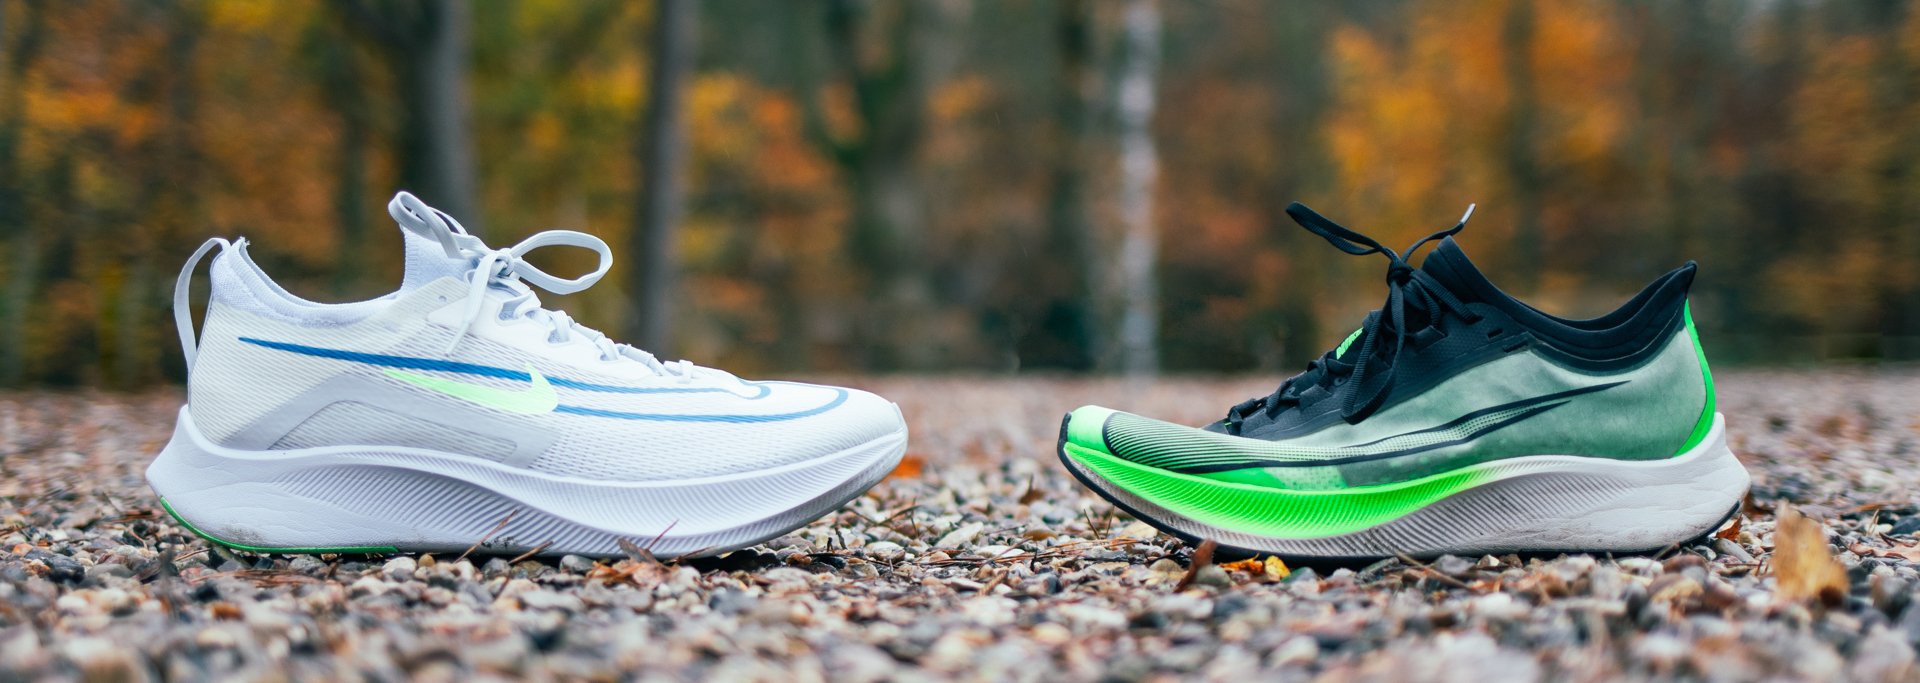 Nike Zoom Fly 4 - A Vaporfly daily miles -